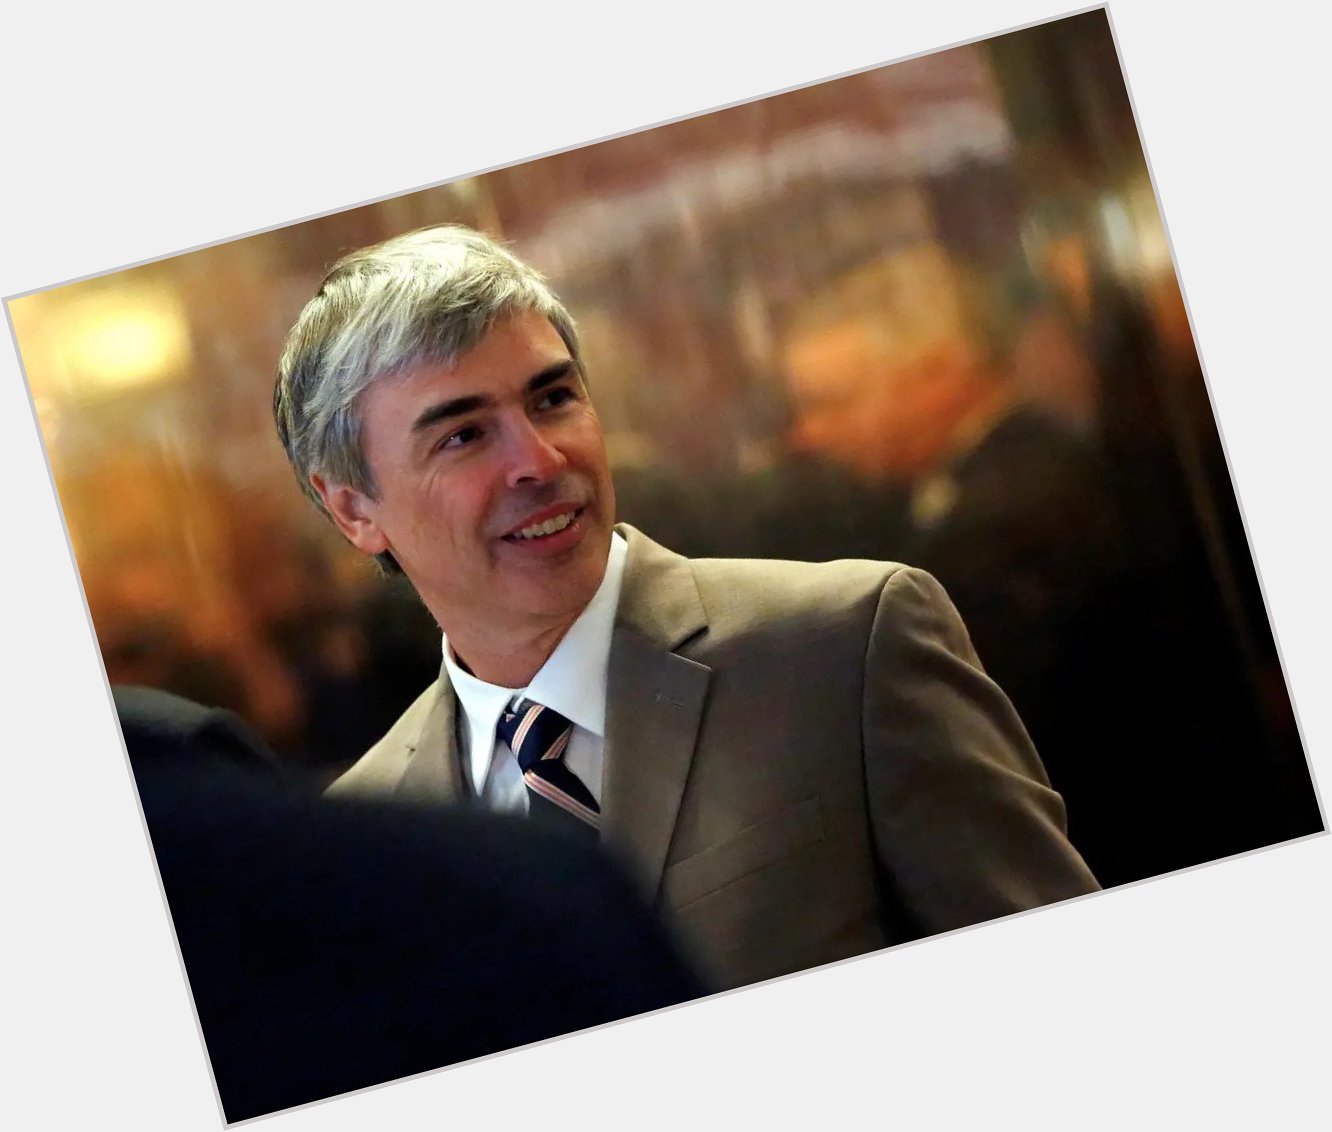 Wishing A Very Happy Birthday to the co-founder of Google Larry Page    